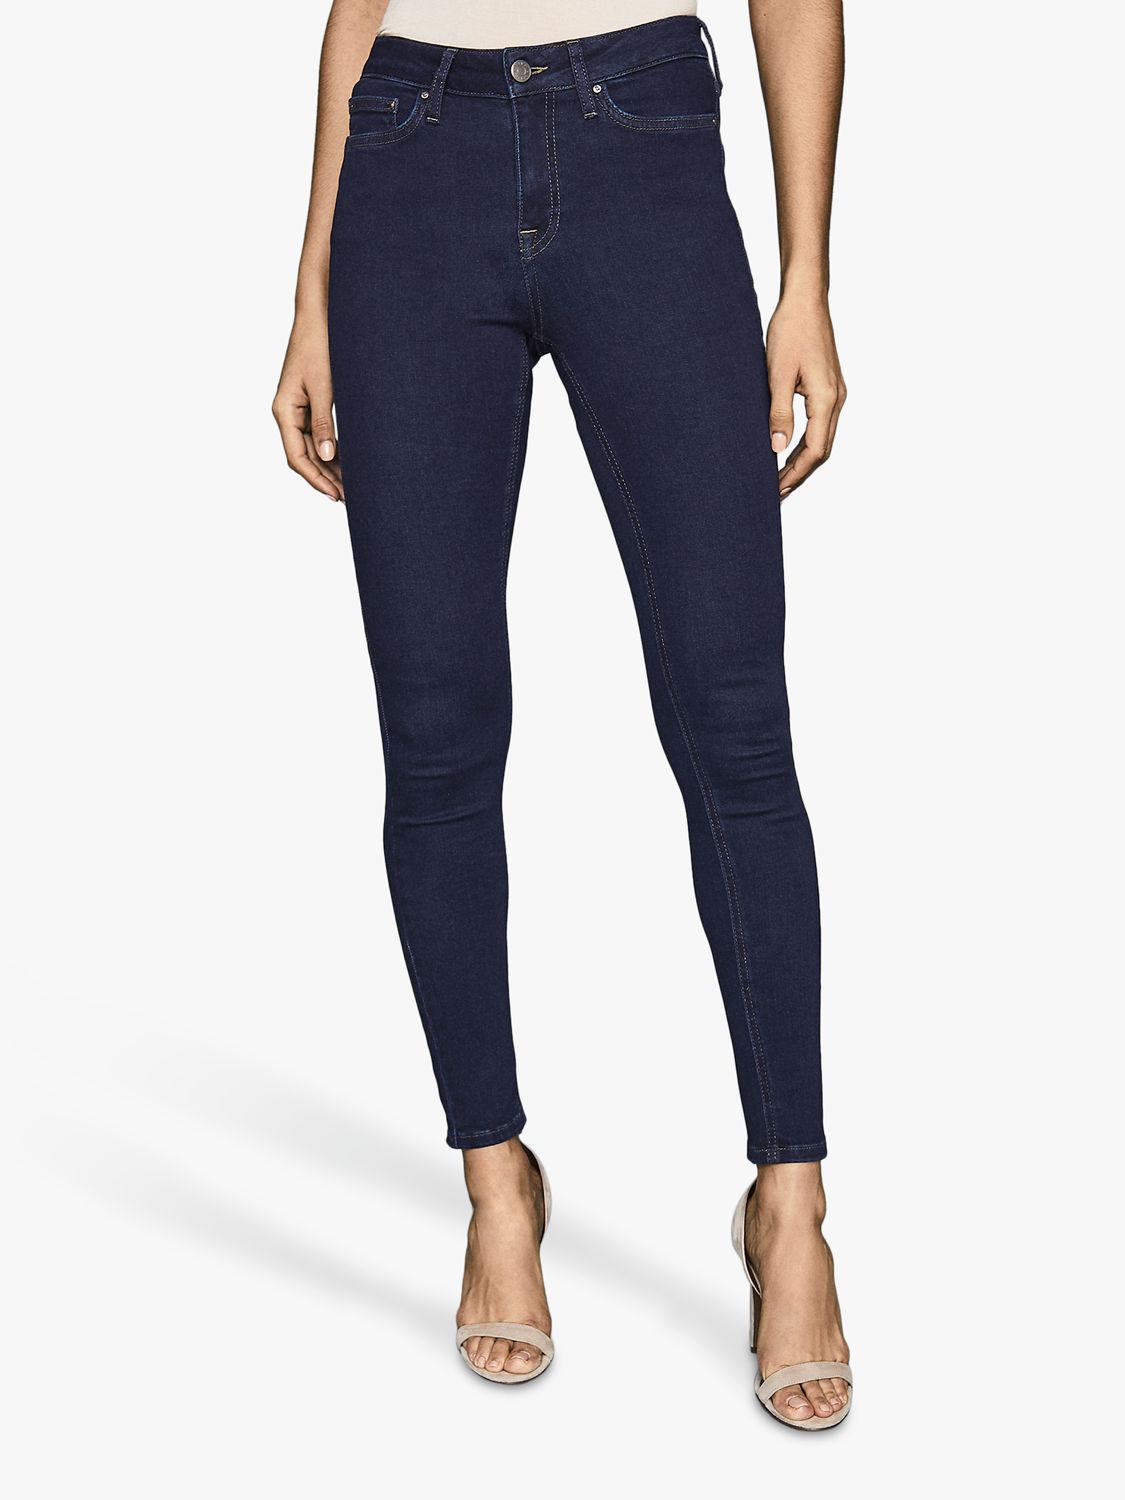 Reiss Lux Mid Ride Skinny Jeans, Indigo at John Lewis & Partners